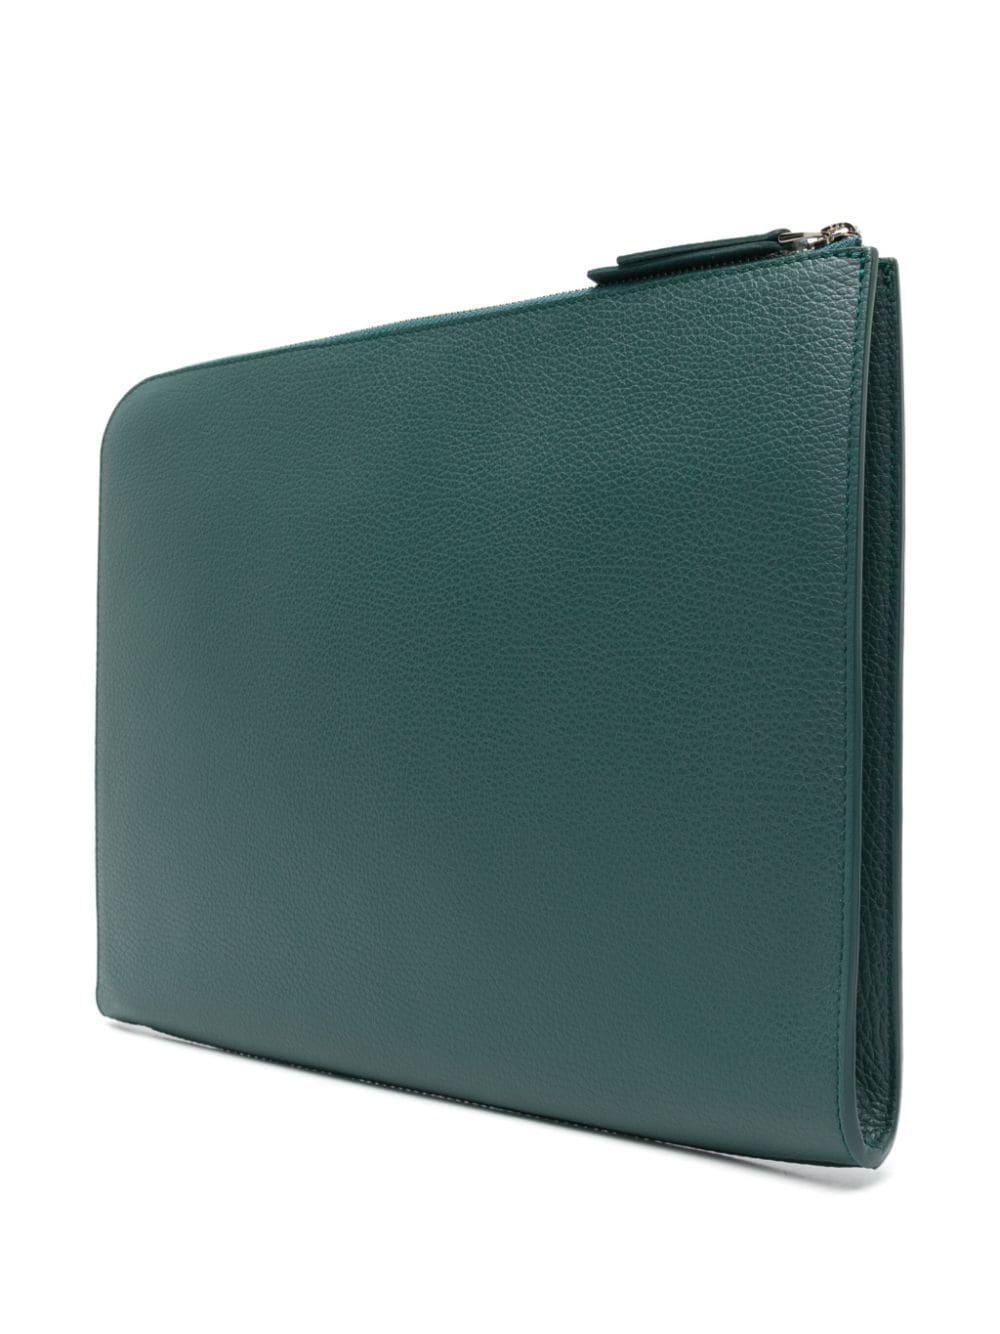 Orciani Micron leather briefcase - Groen